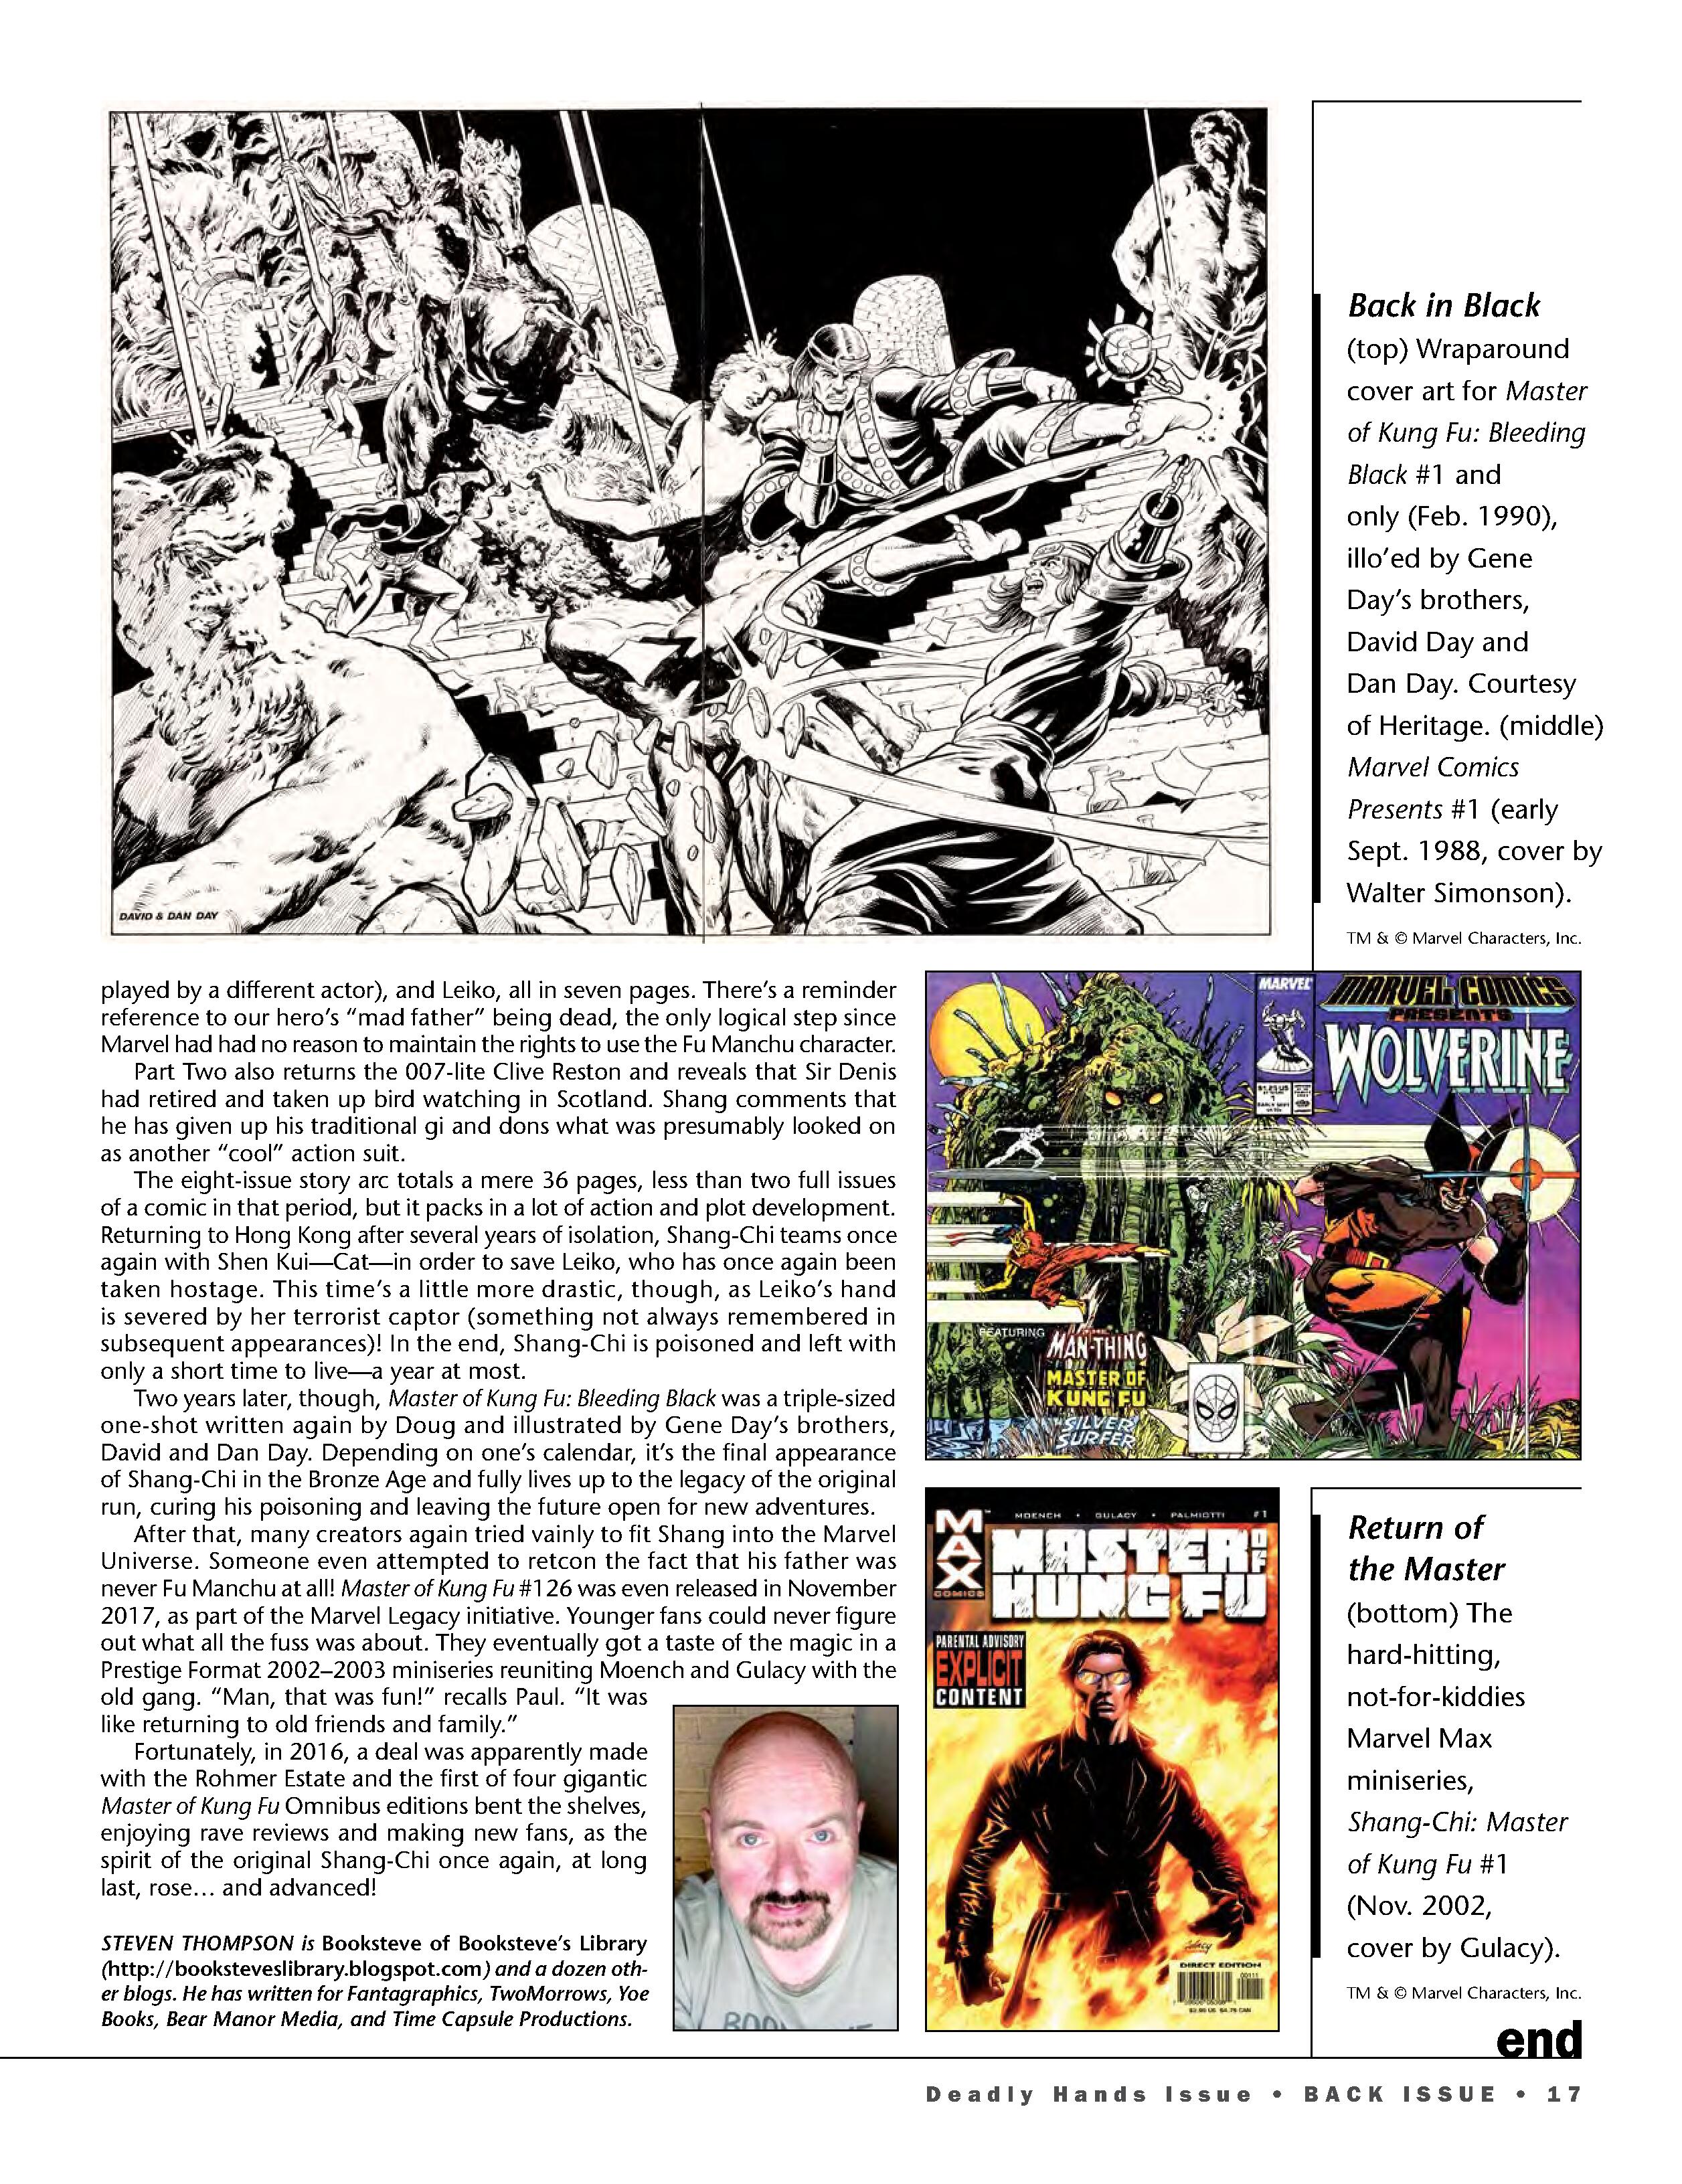 Read online Back Issue comic -  Issue #105 - 19